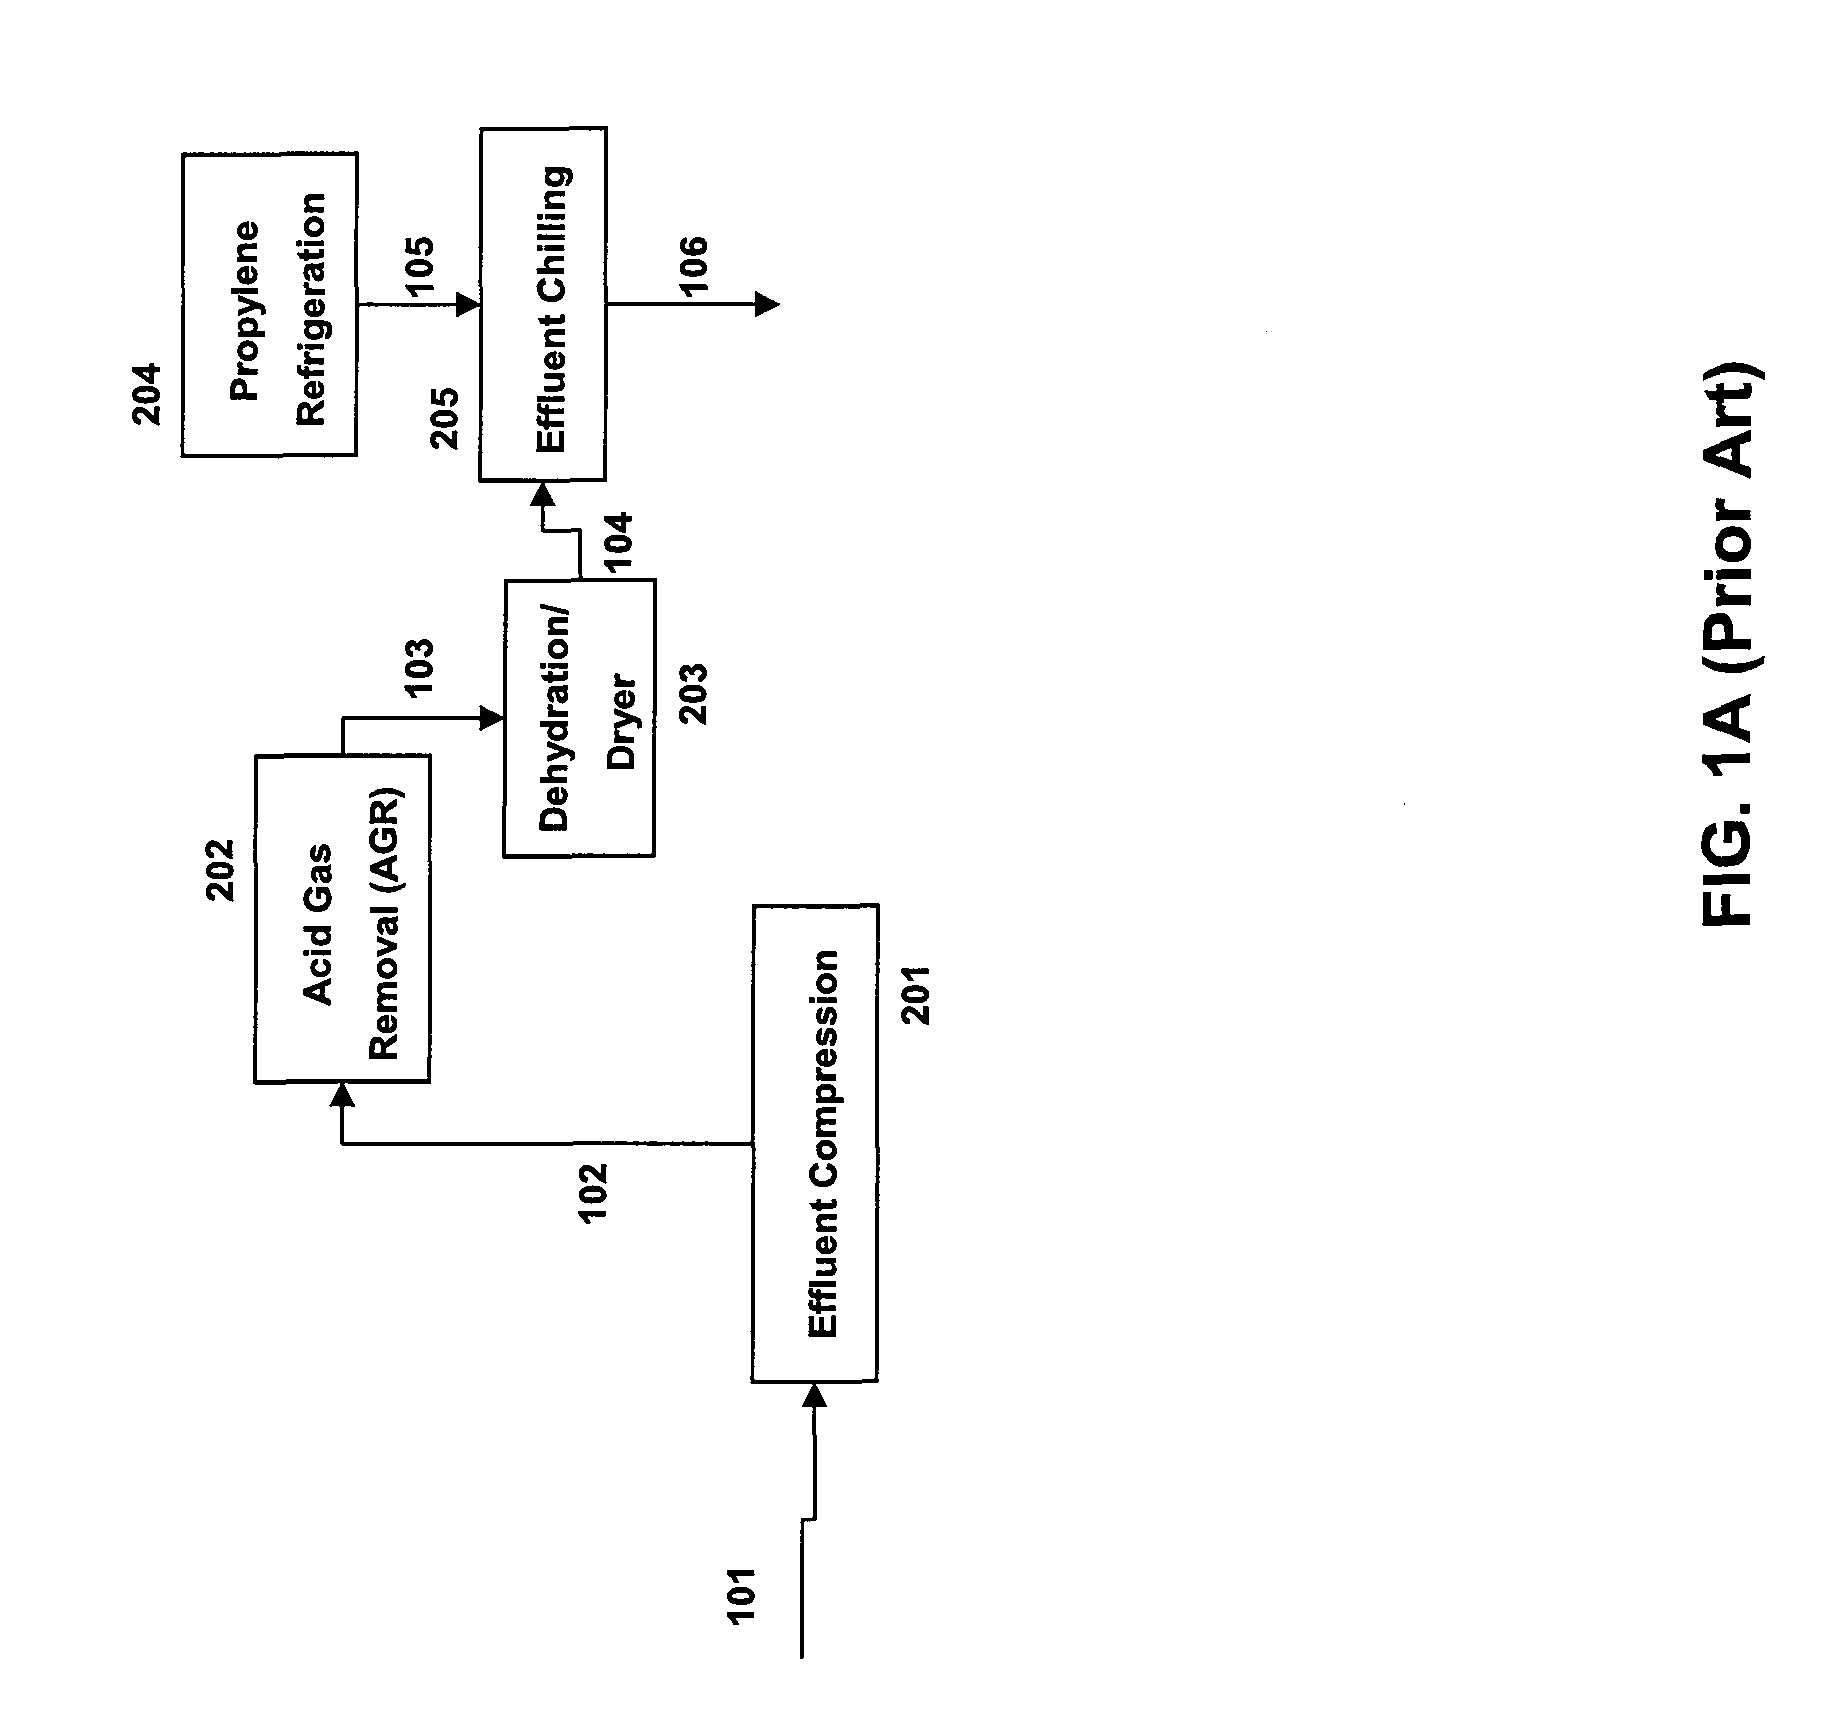 Method for contaminants removal in the olefin production process